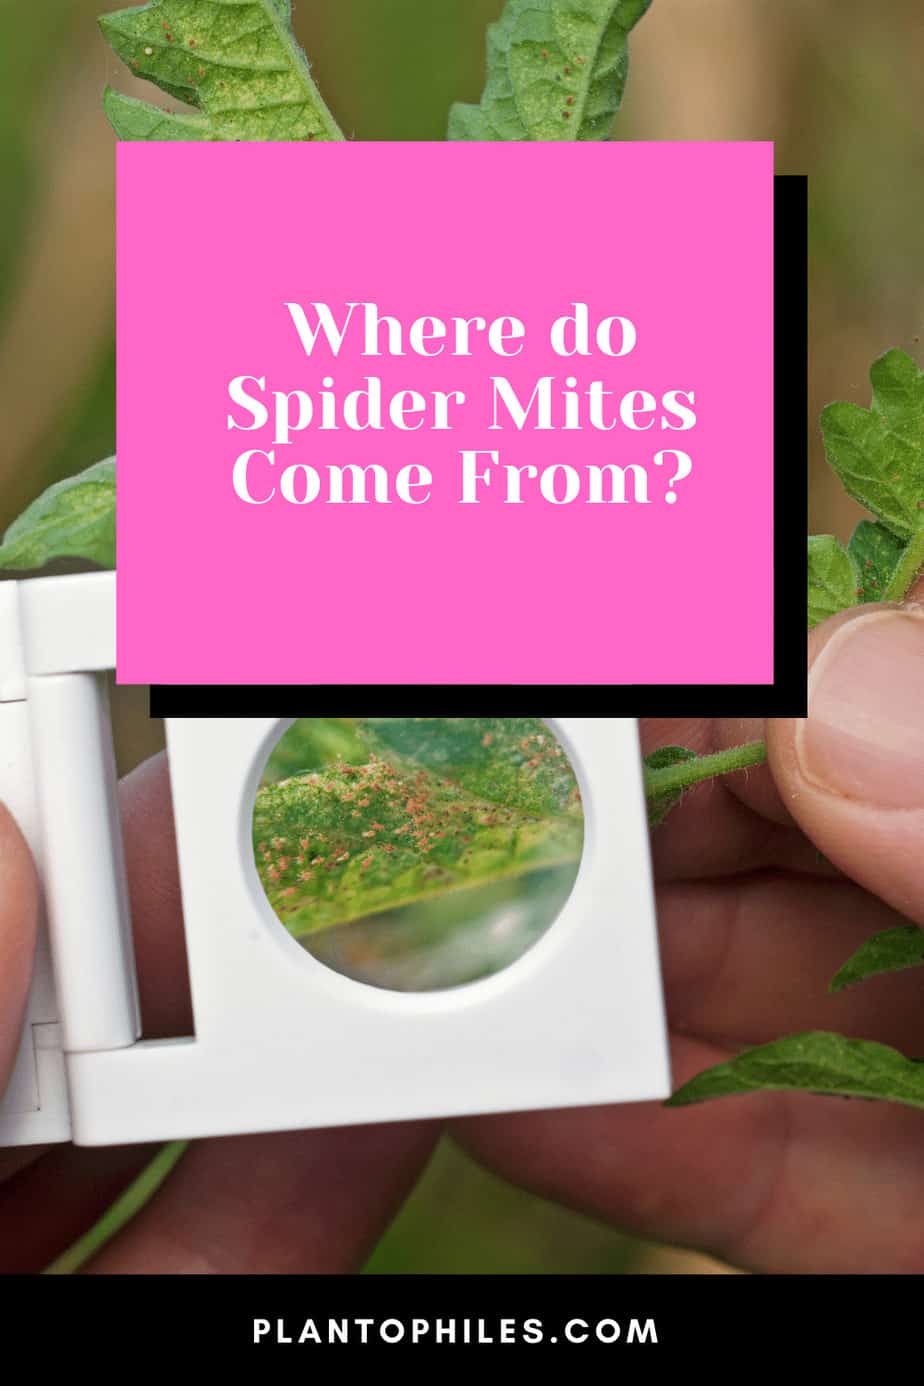 Where do Spider Mites Come From